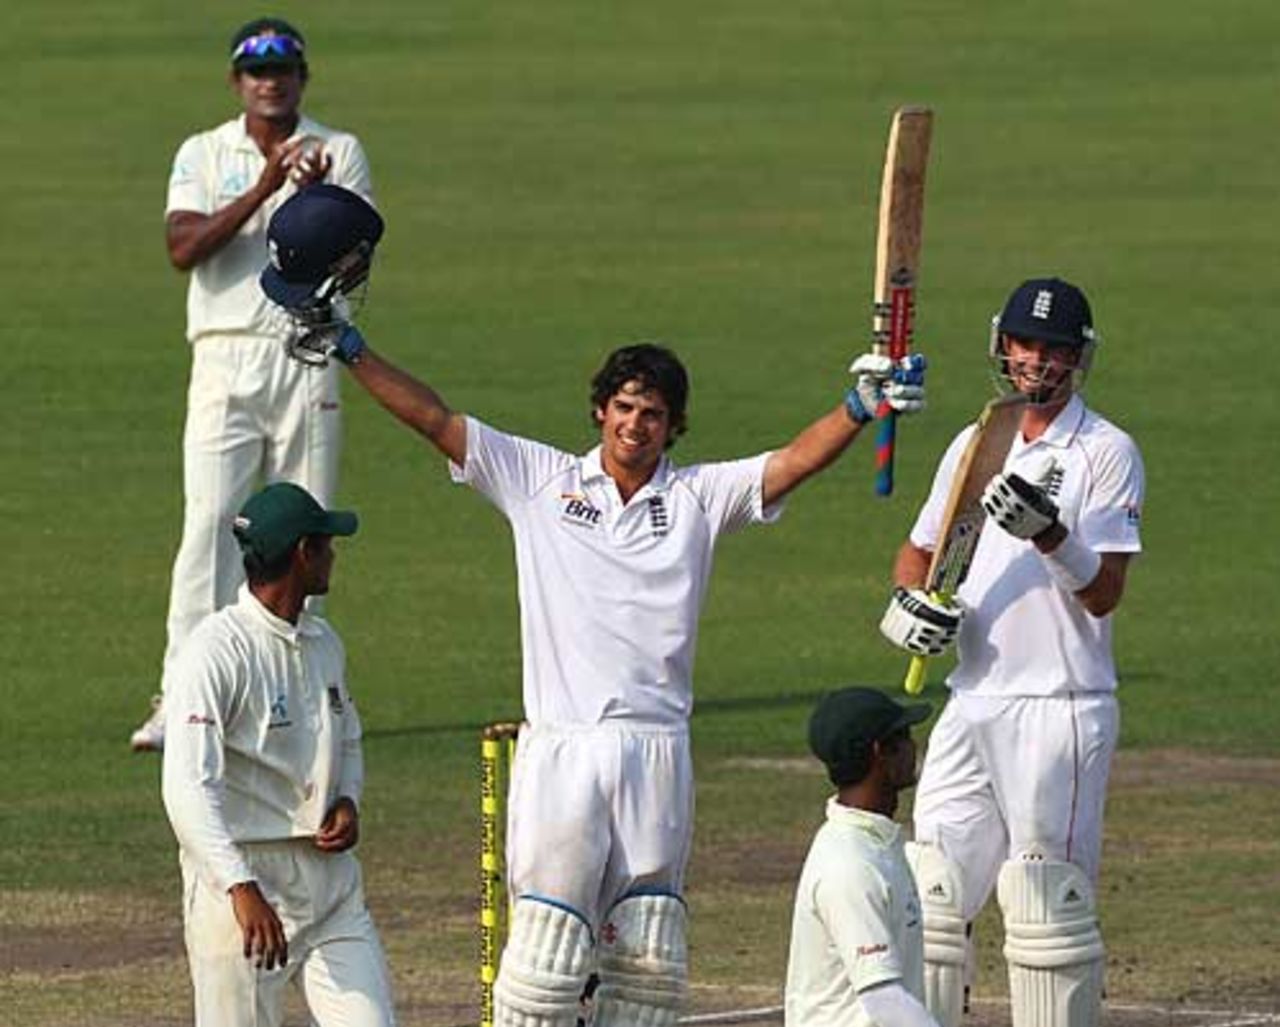 Alastair Cook celebrates his hundred as he takes England to victory, Bangladesh v England, 2nd Test, Dhaka, 5th day, March 24, 2010